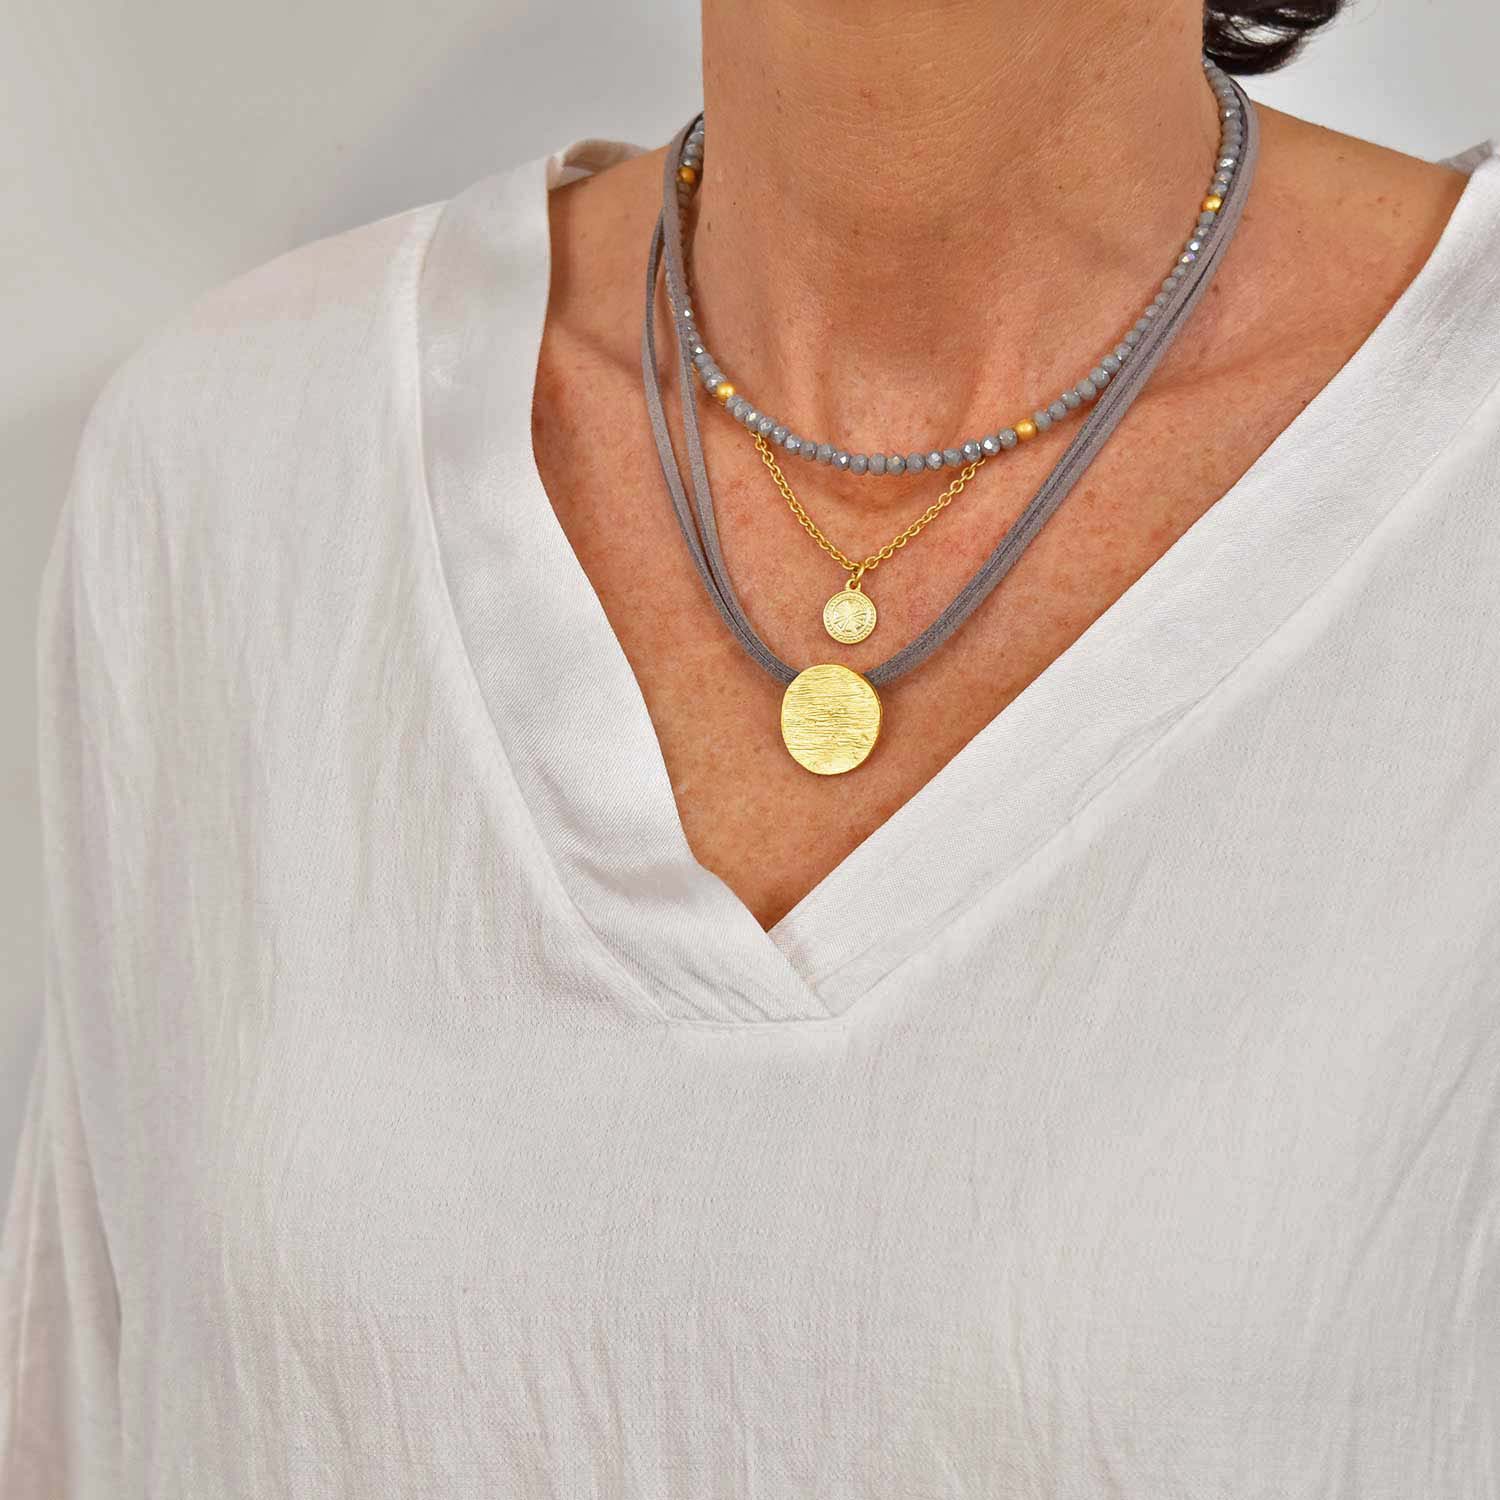 Gold gray triple medal necklace